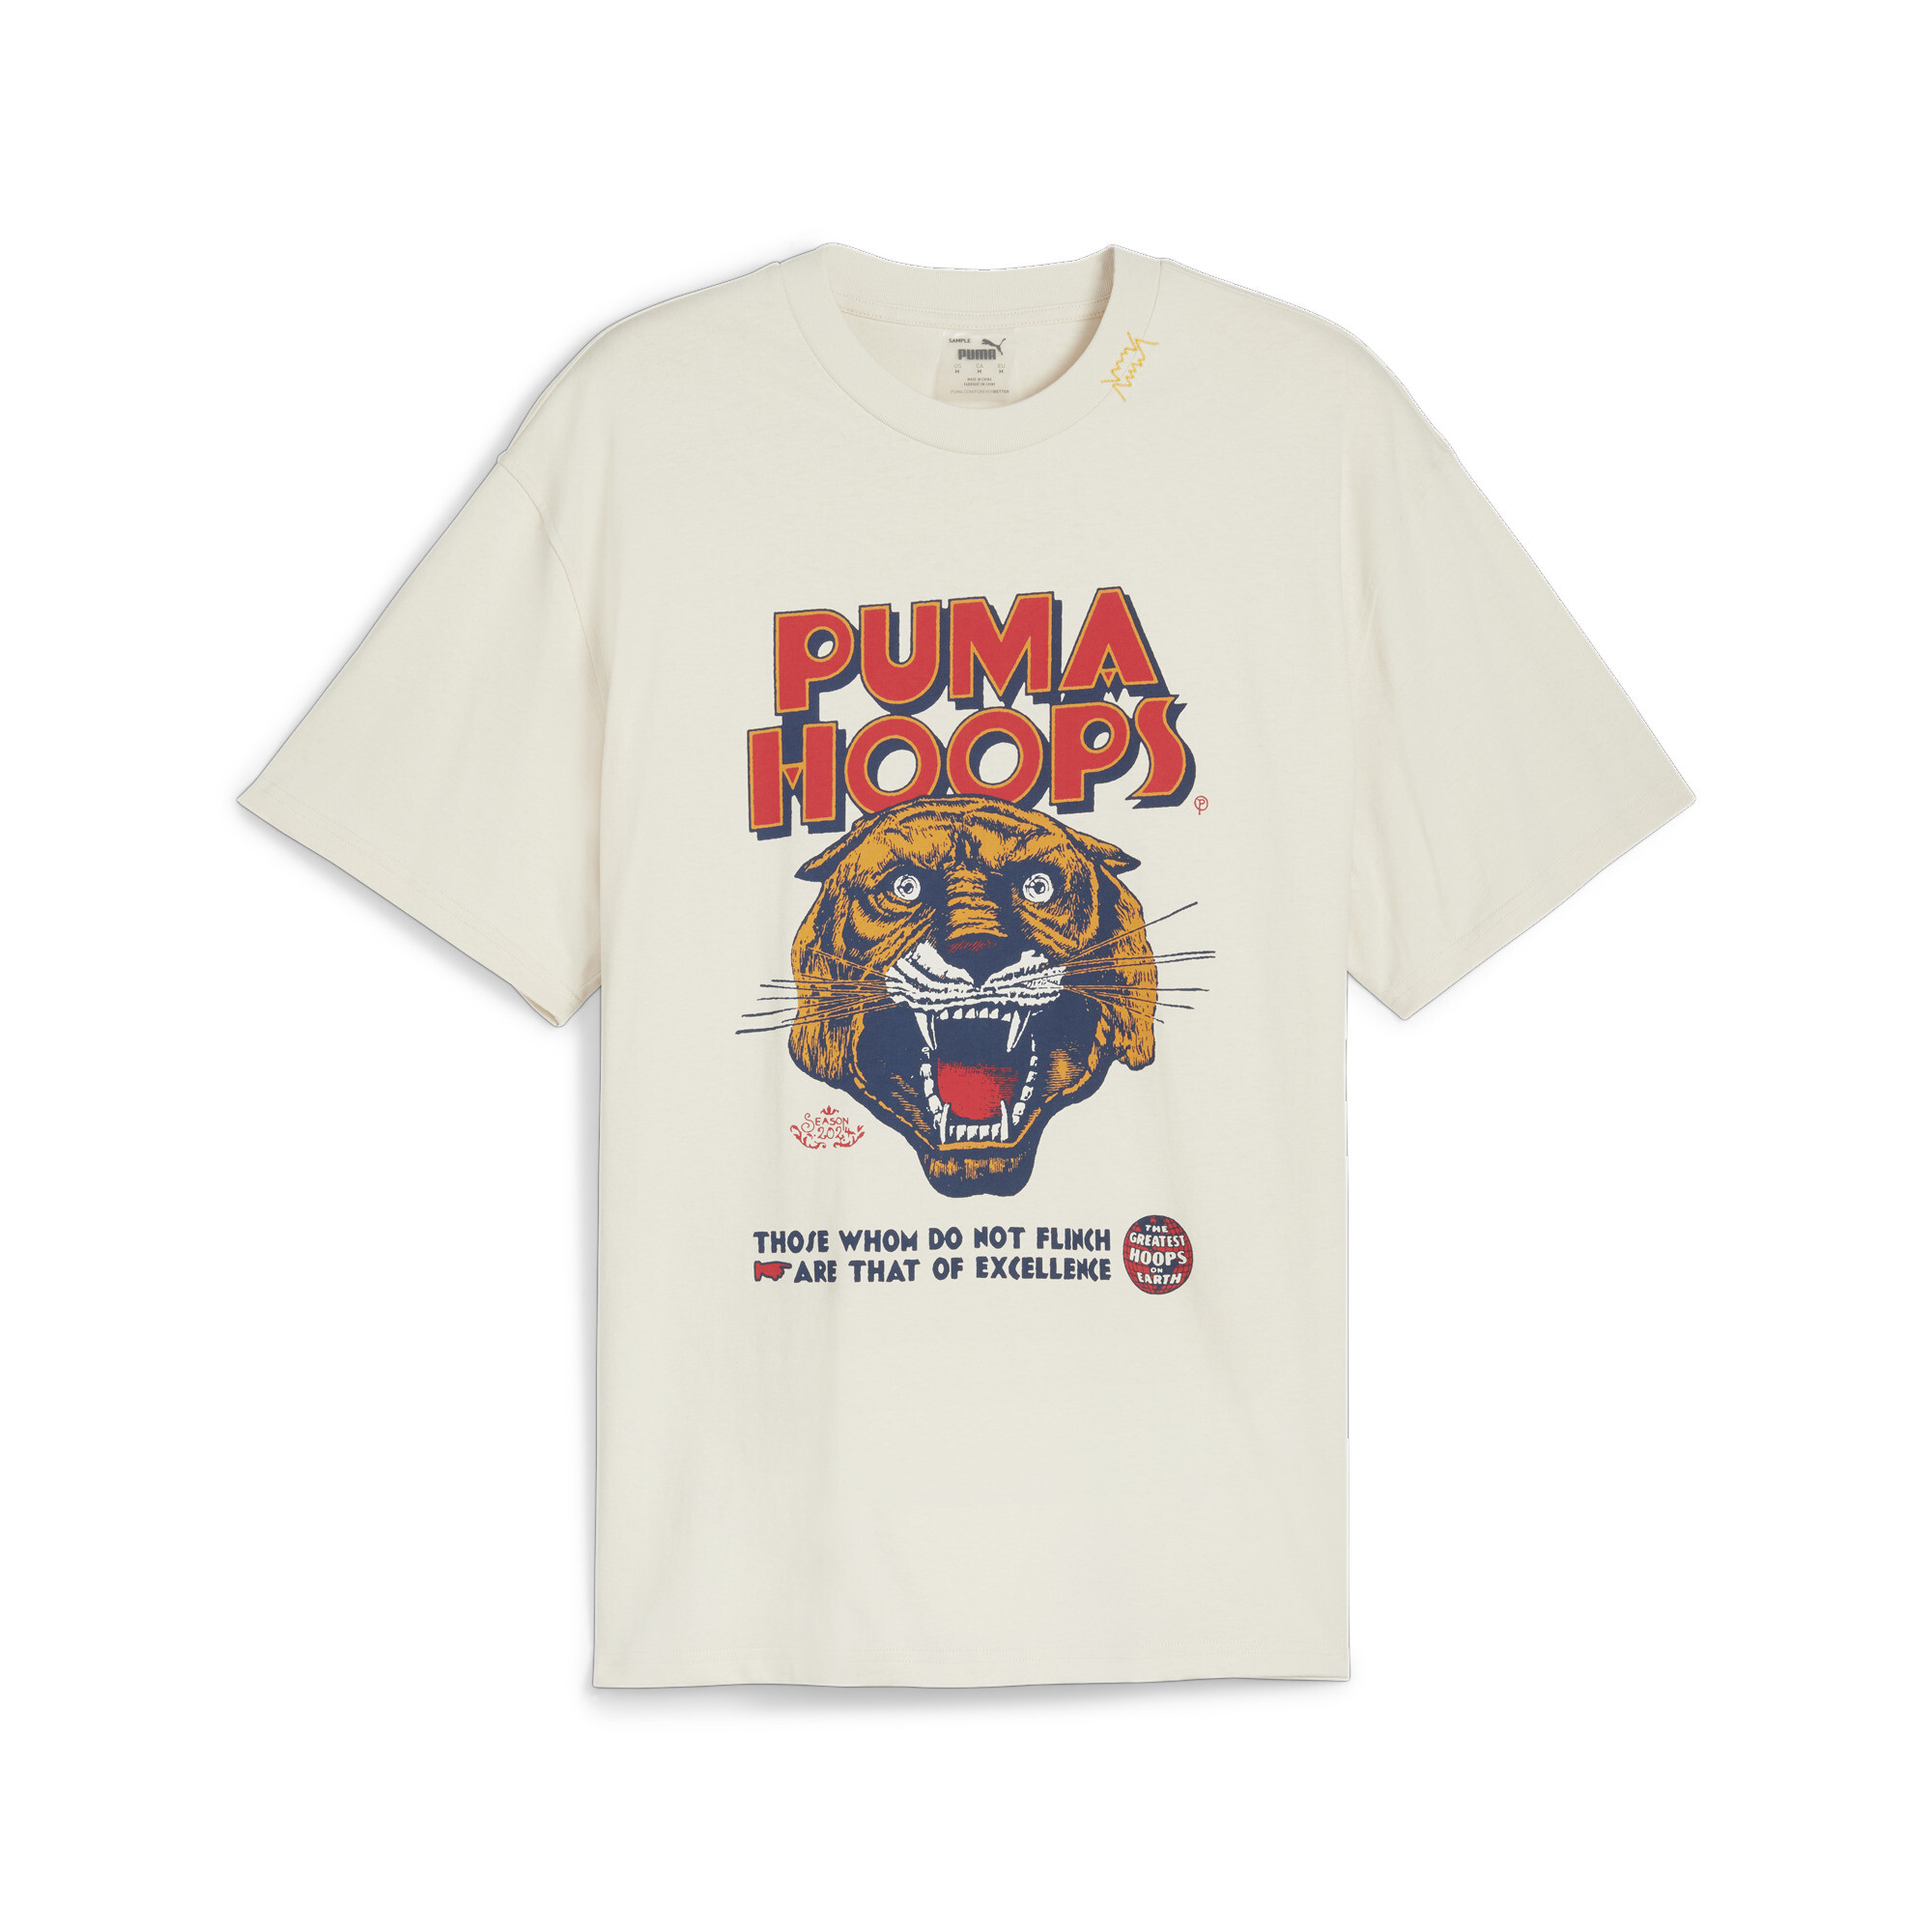 Men's PUMA HOOPS Showtime T-Shirt In White, Size XL